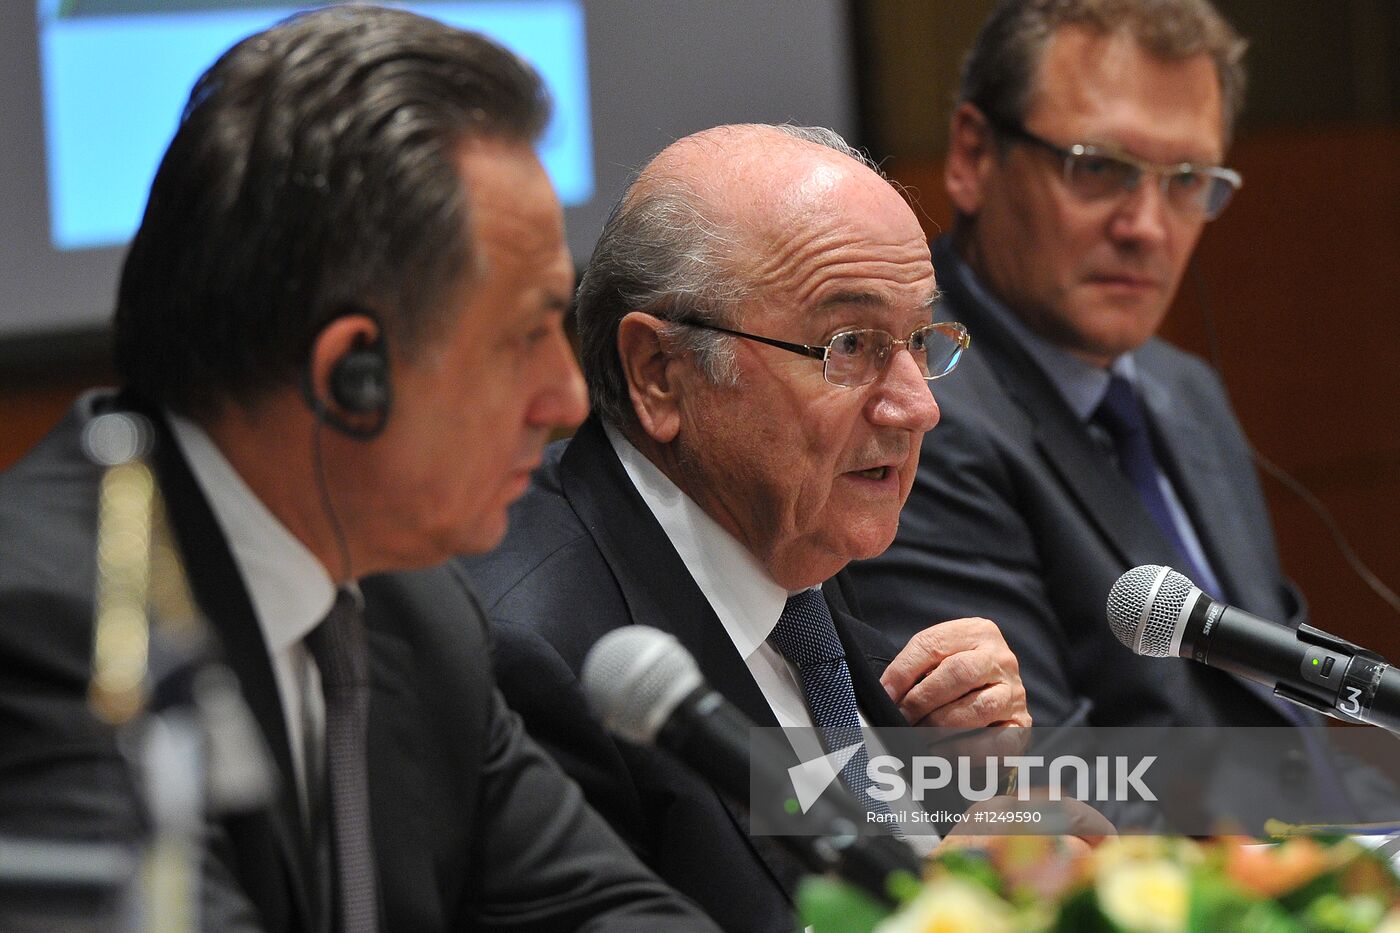 Russia-2018 organizing committee and FIFA hold news conference